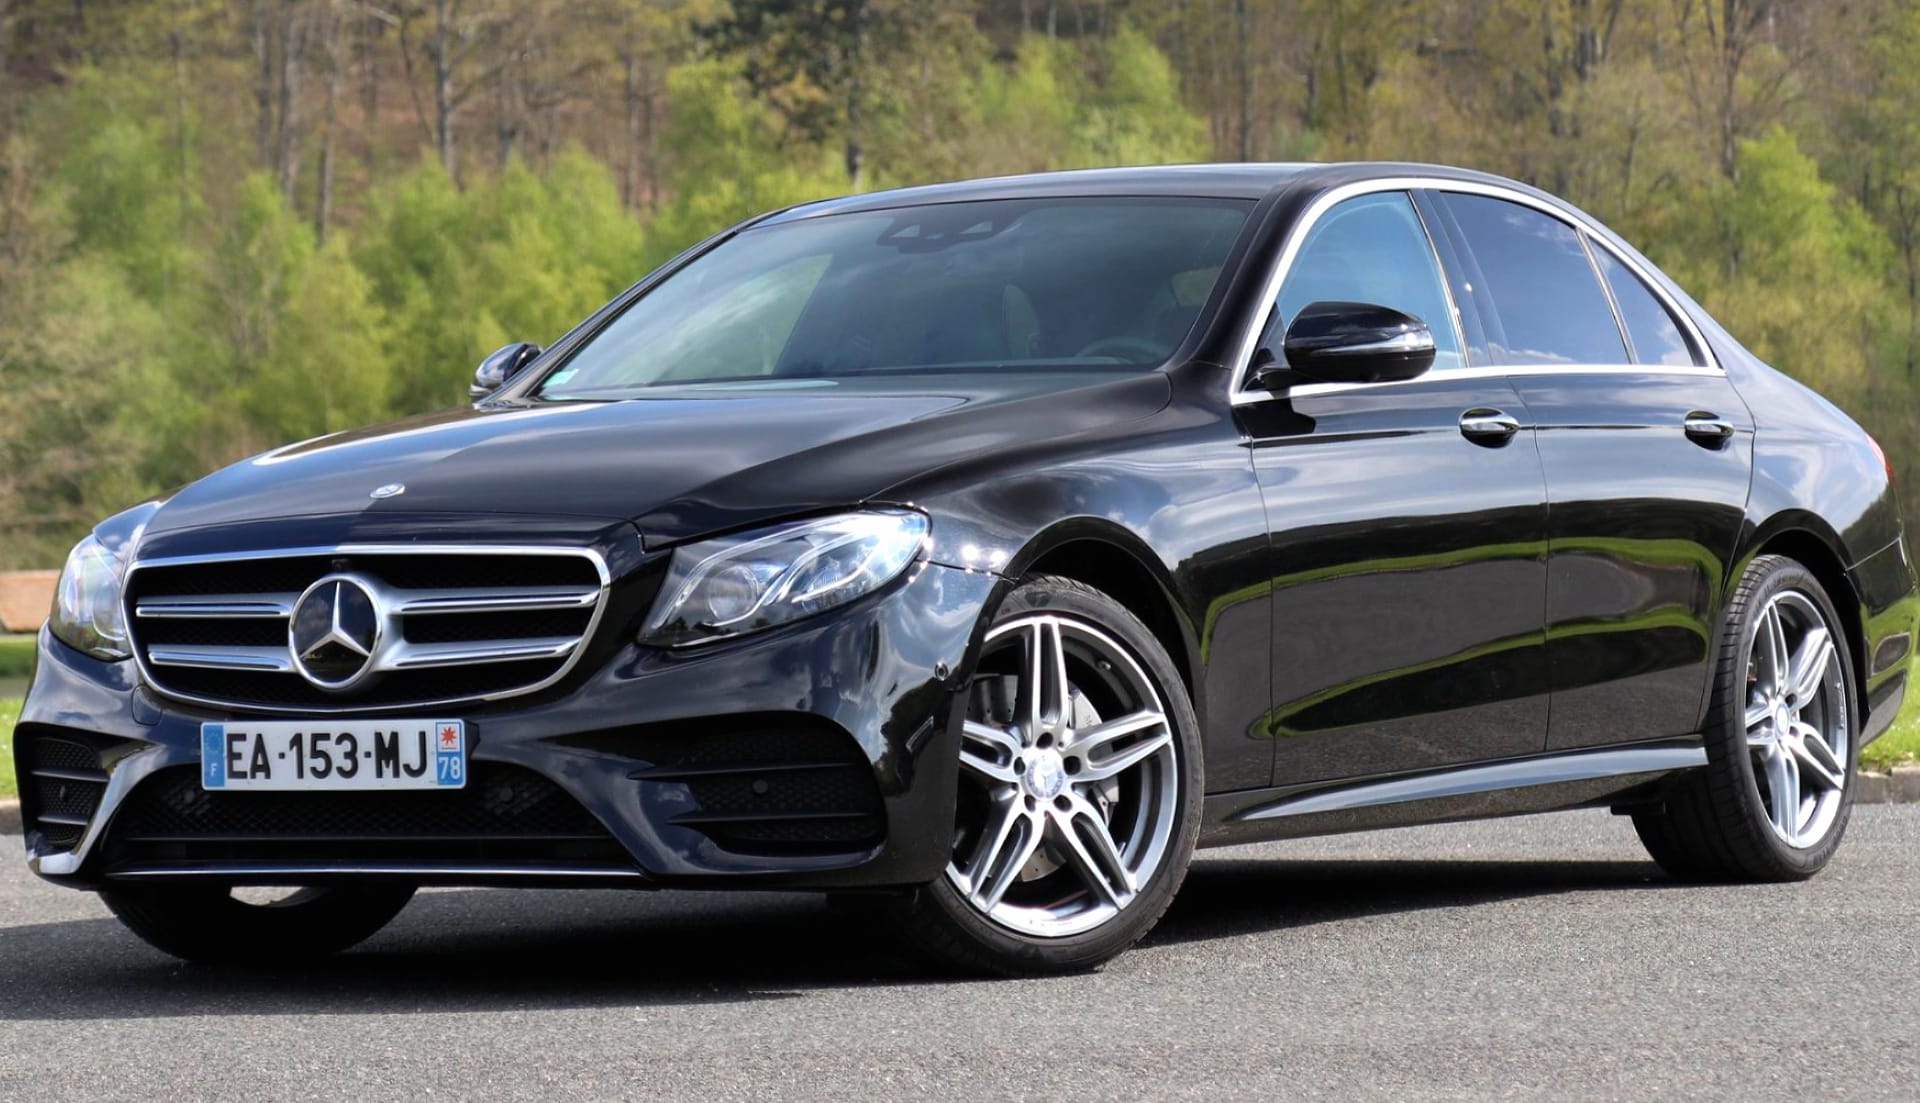 Mercedes-Benz E 220d AMG Line wallpapers HD quality